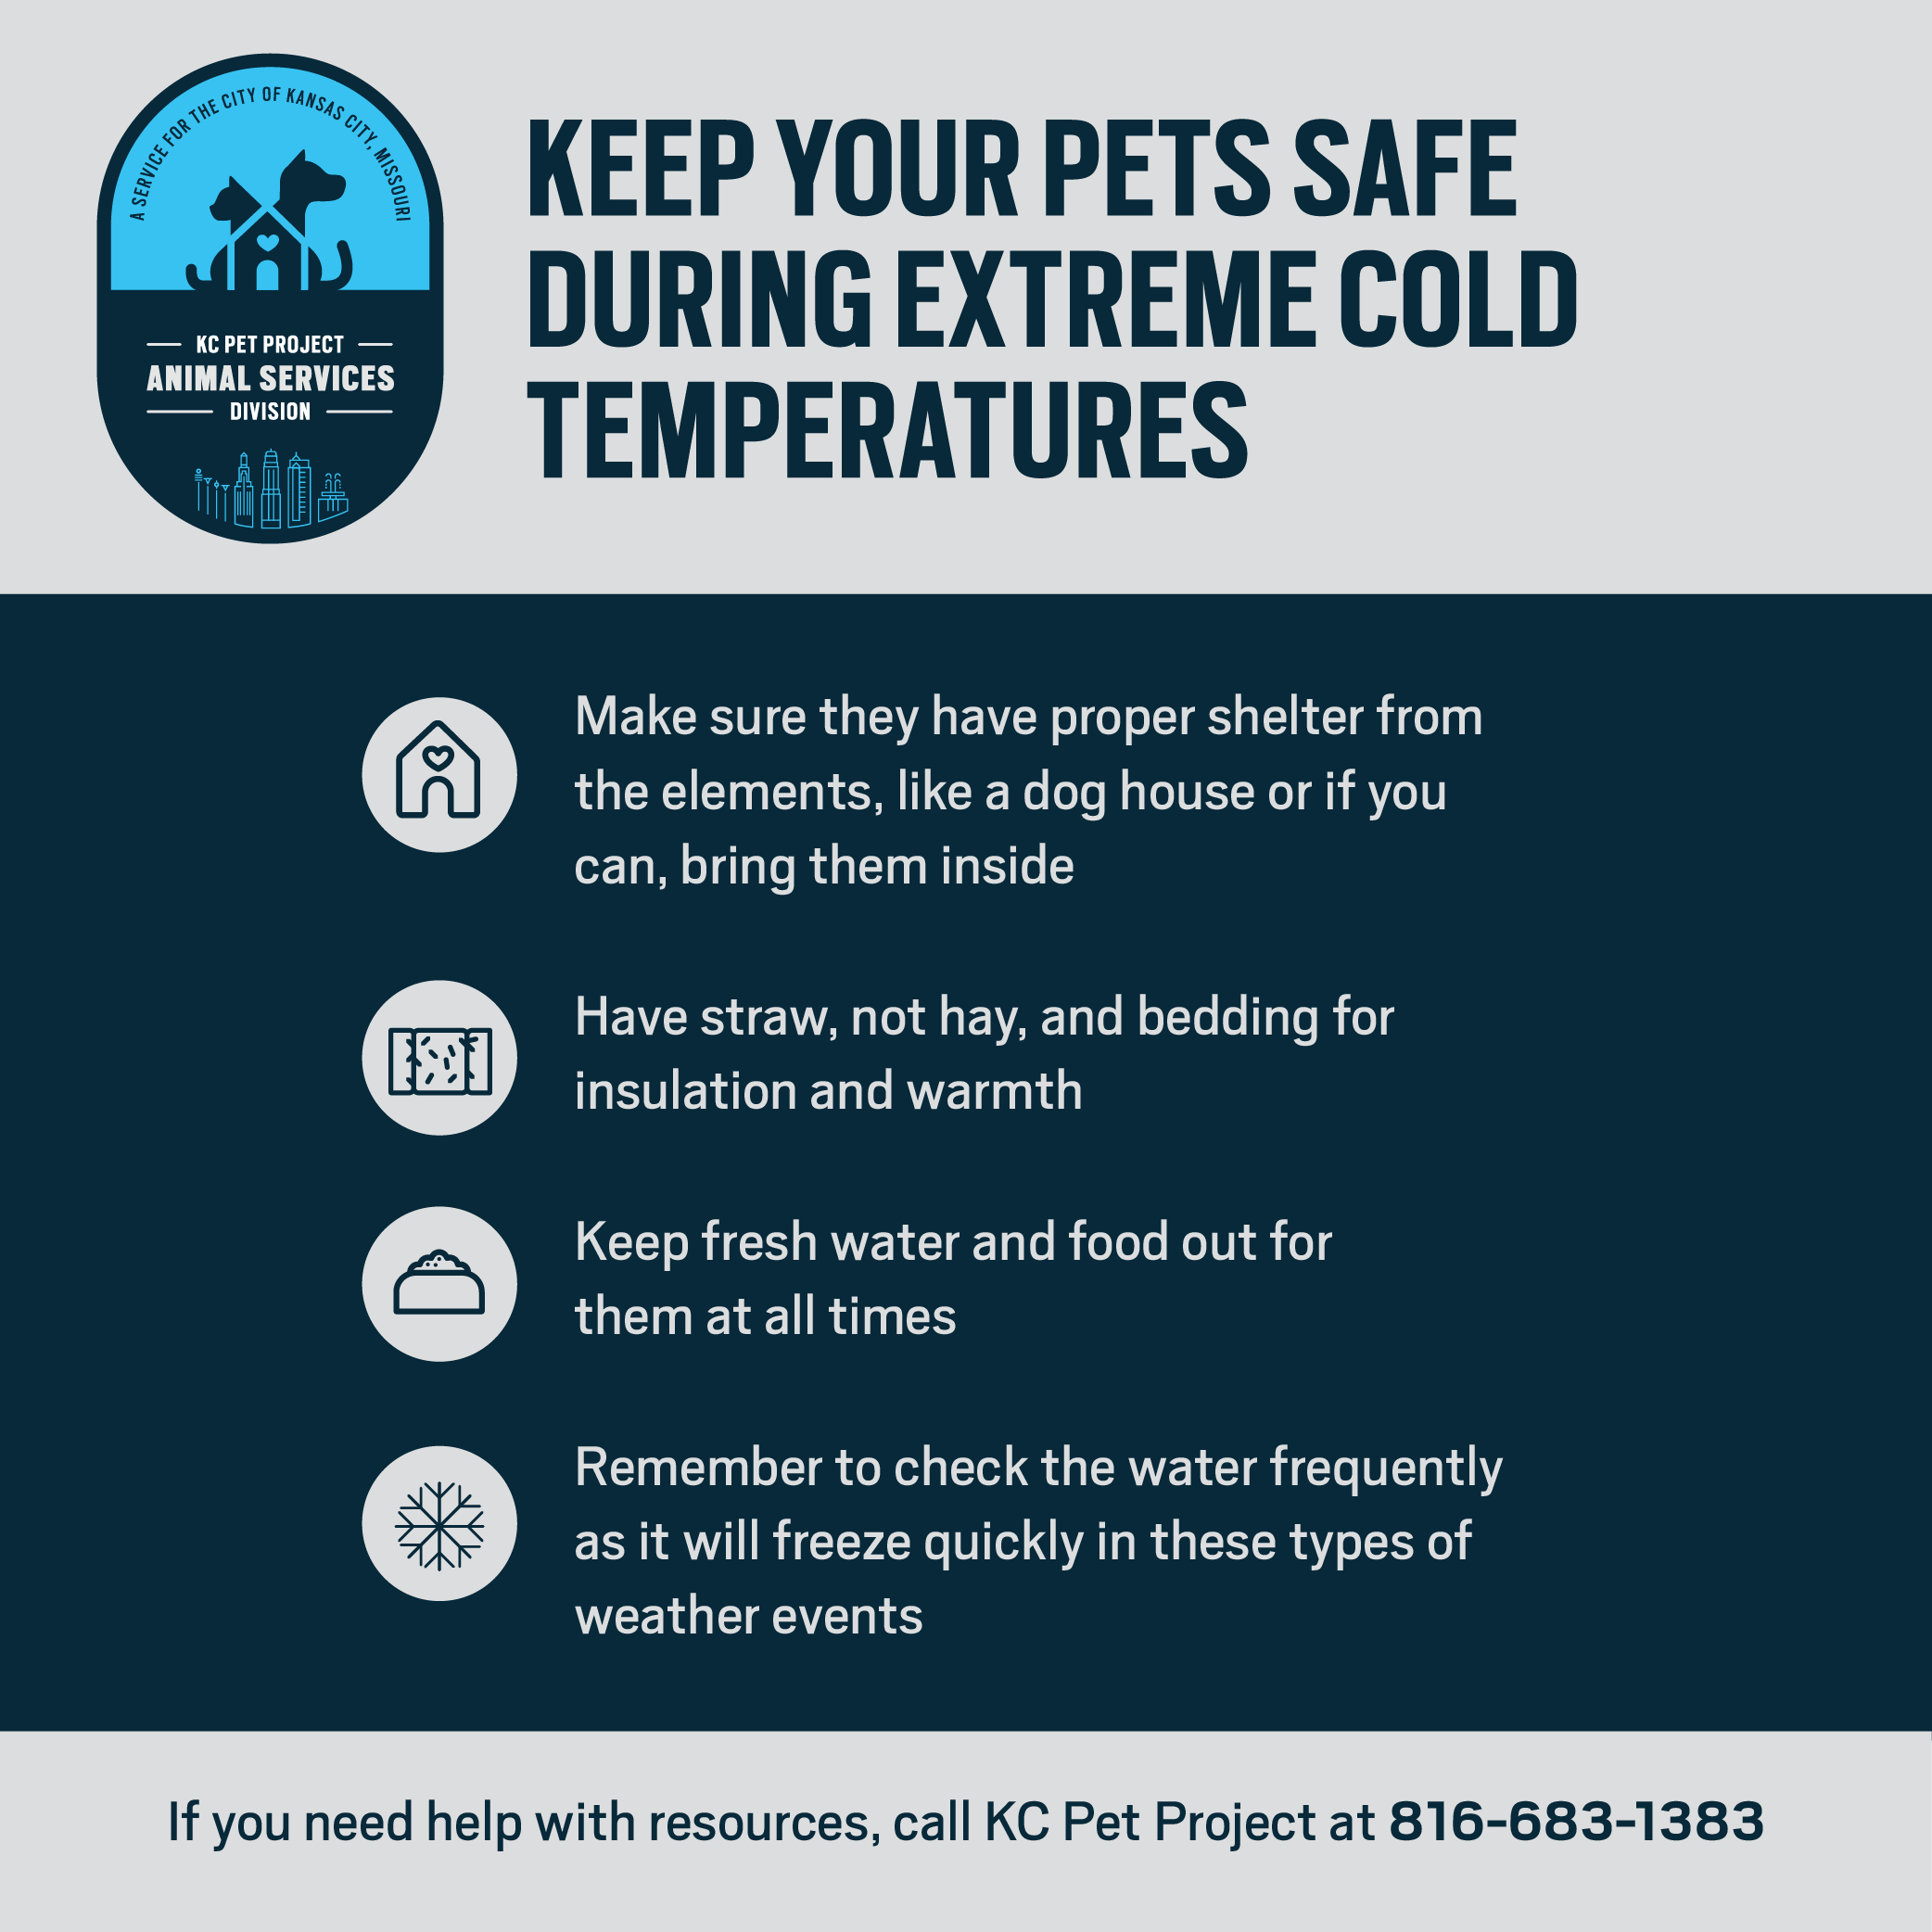 Keep Your Pets Safe During Extreme Cold Temperatures